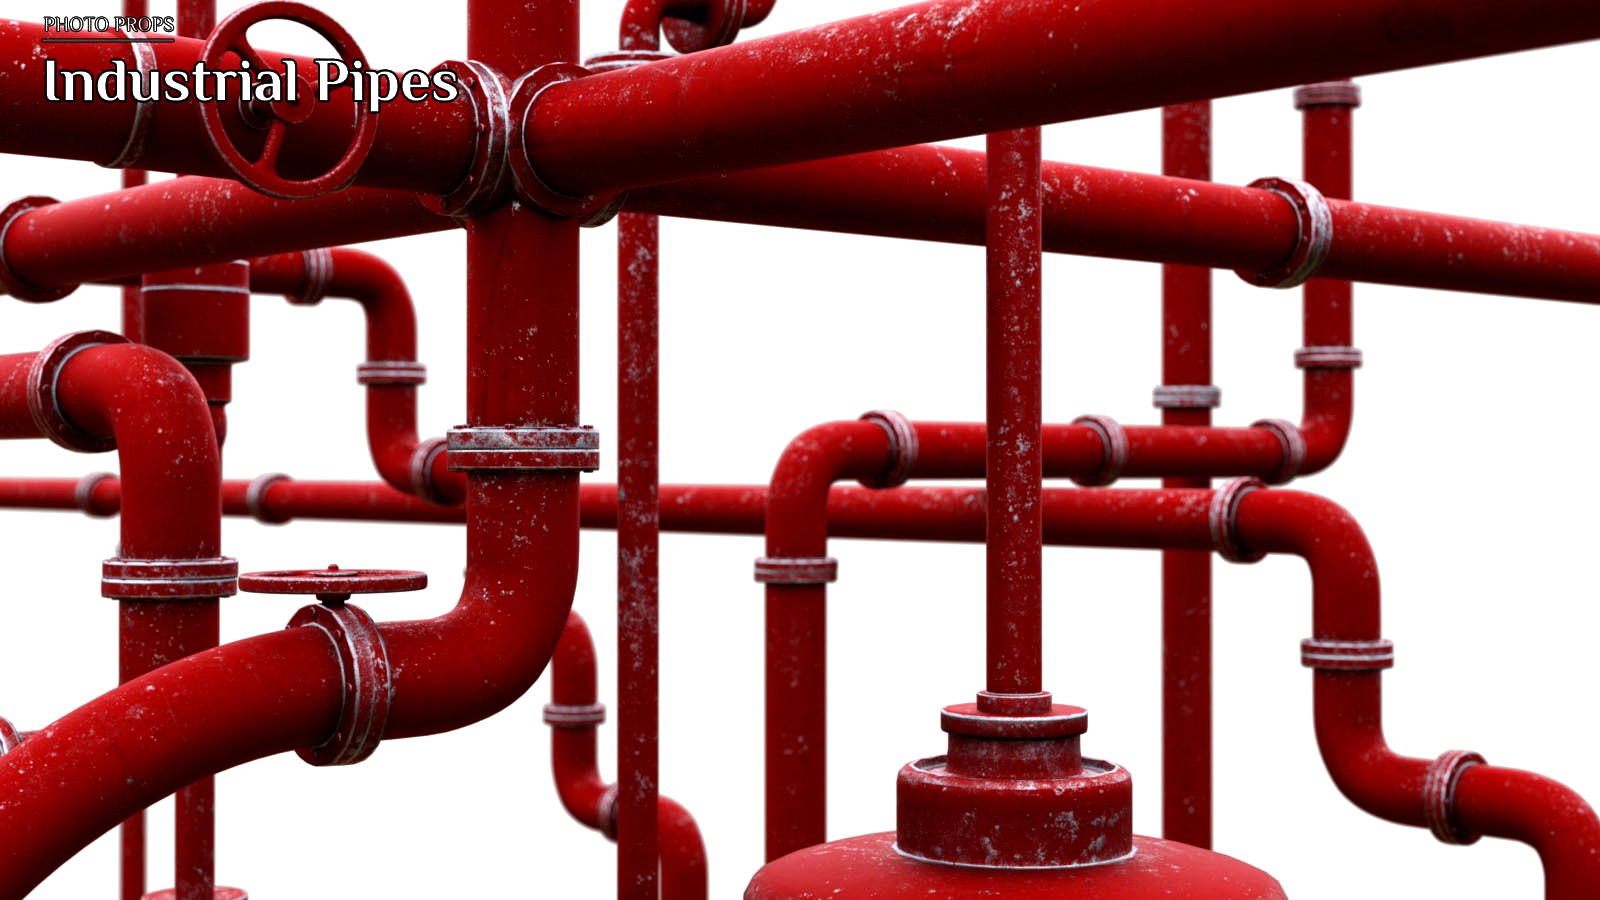 Photo Props: Industrial Pipes